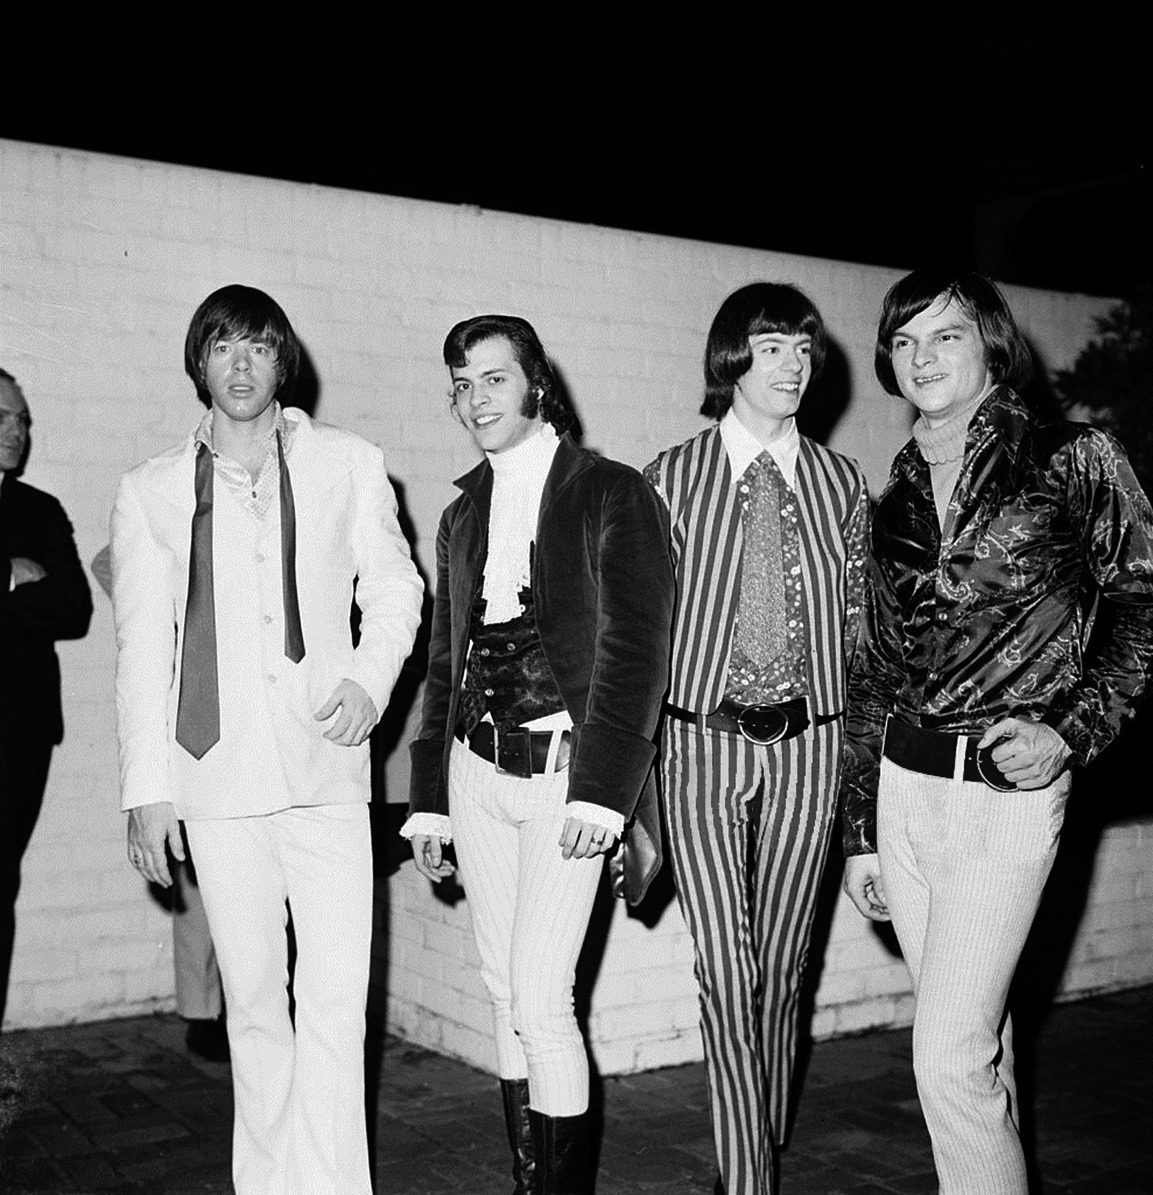 The Seeds (L-R) Sky Saxon, Daryl Hooper,Rick Andridge and Jan Savage) pose for a photo in 1967 in Los Angeles